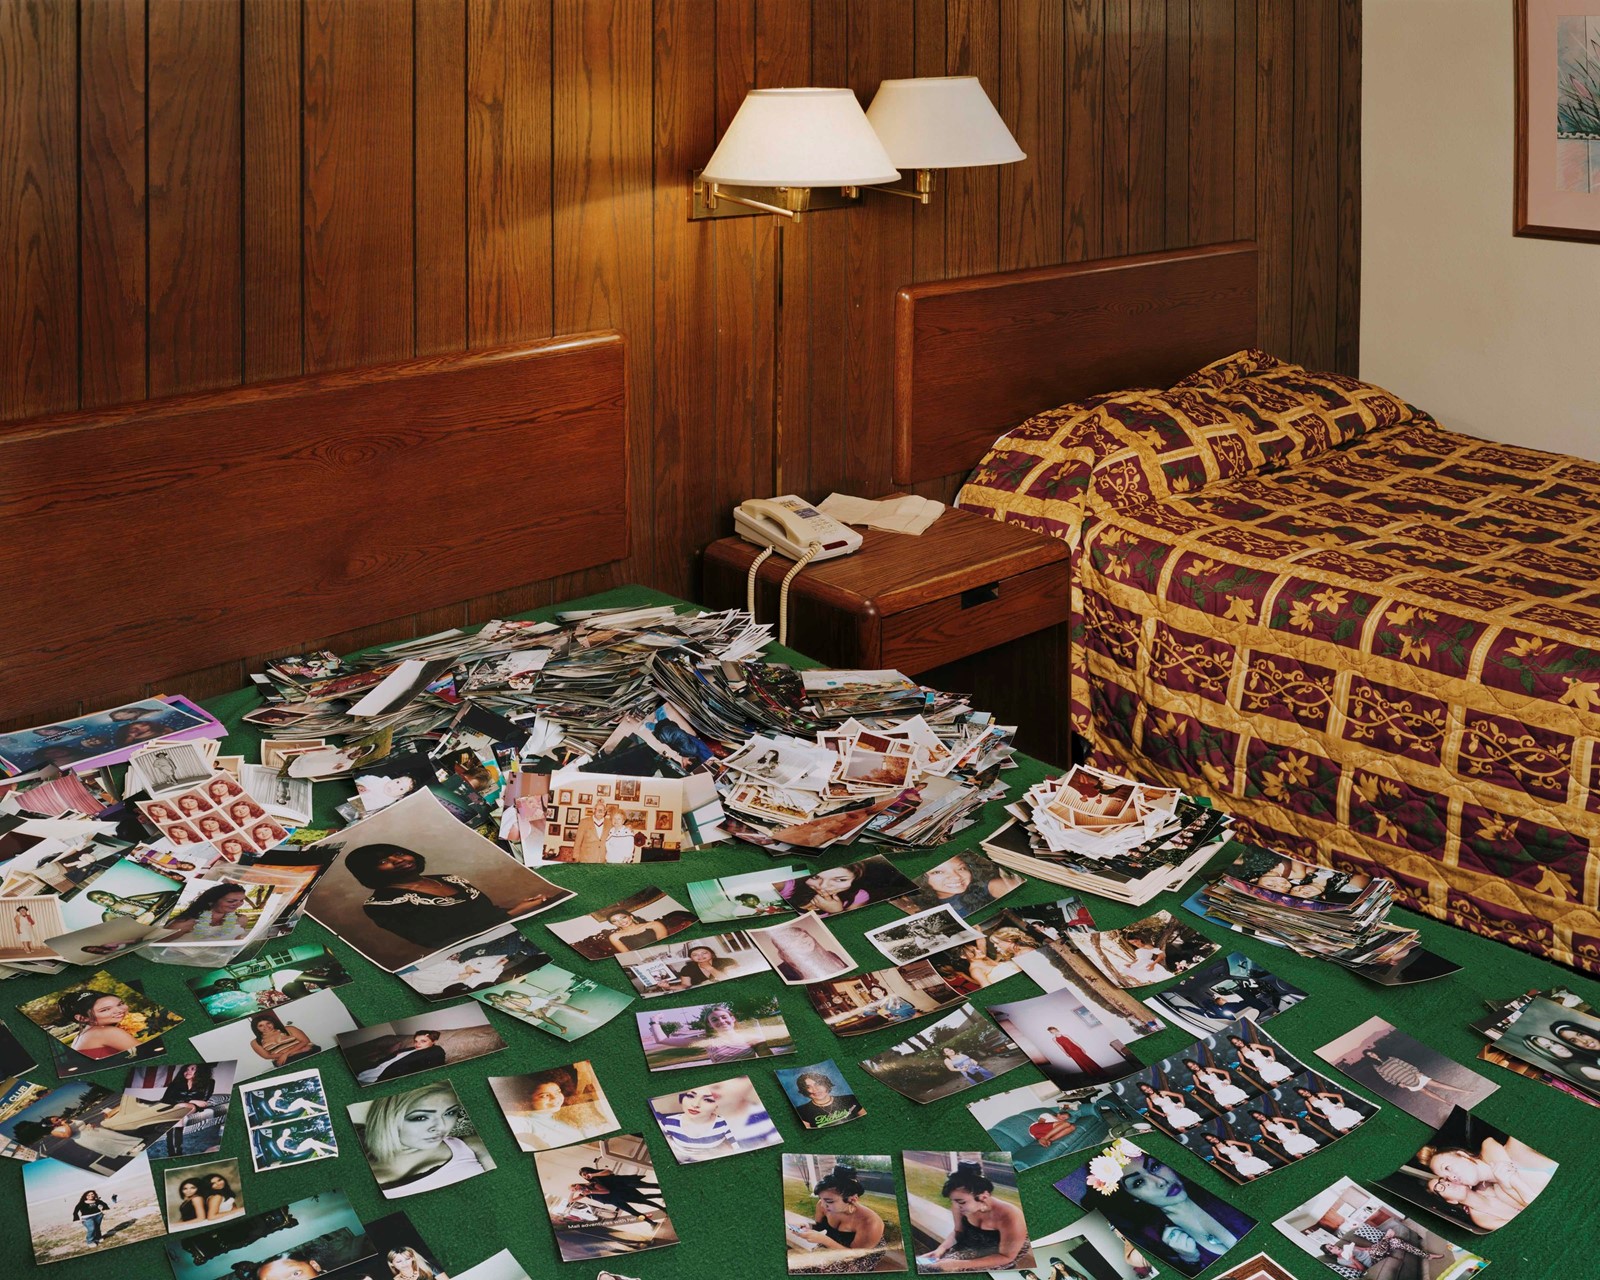 A Pound of Pictures by Alec Soth